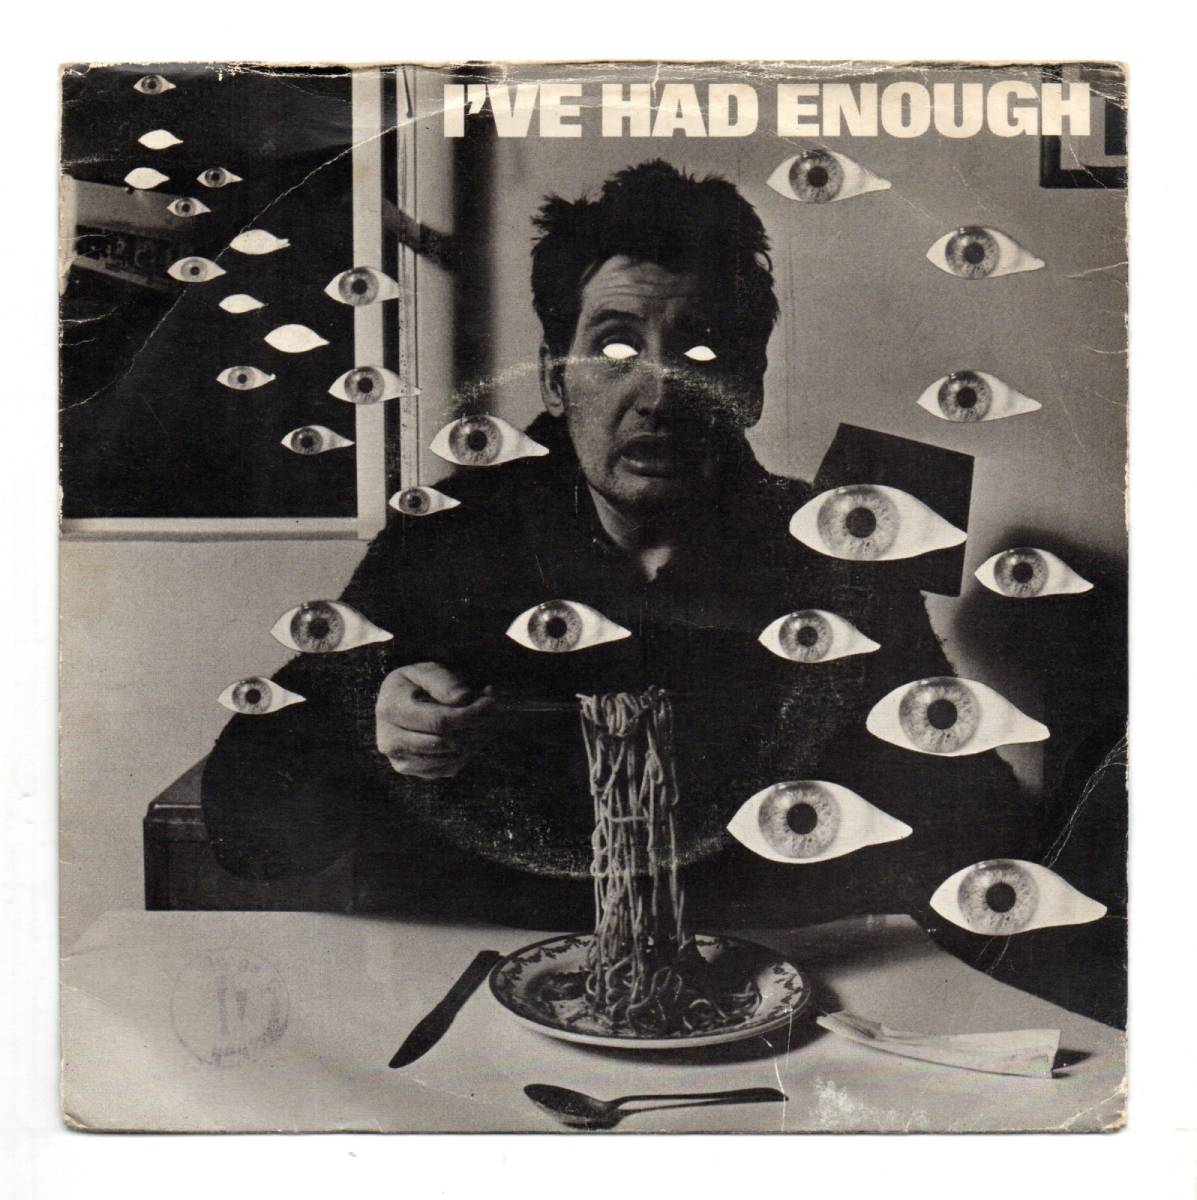 Paul McCartney & Wings - I've Had Enough/Deliver Your Children (UK 7inch) MPL R6020_画像1